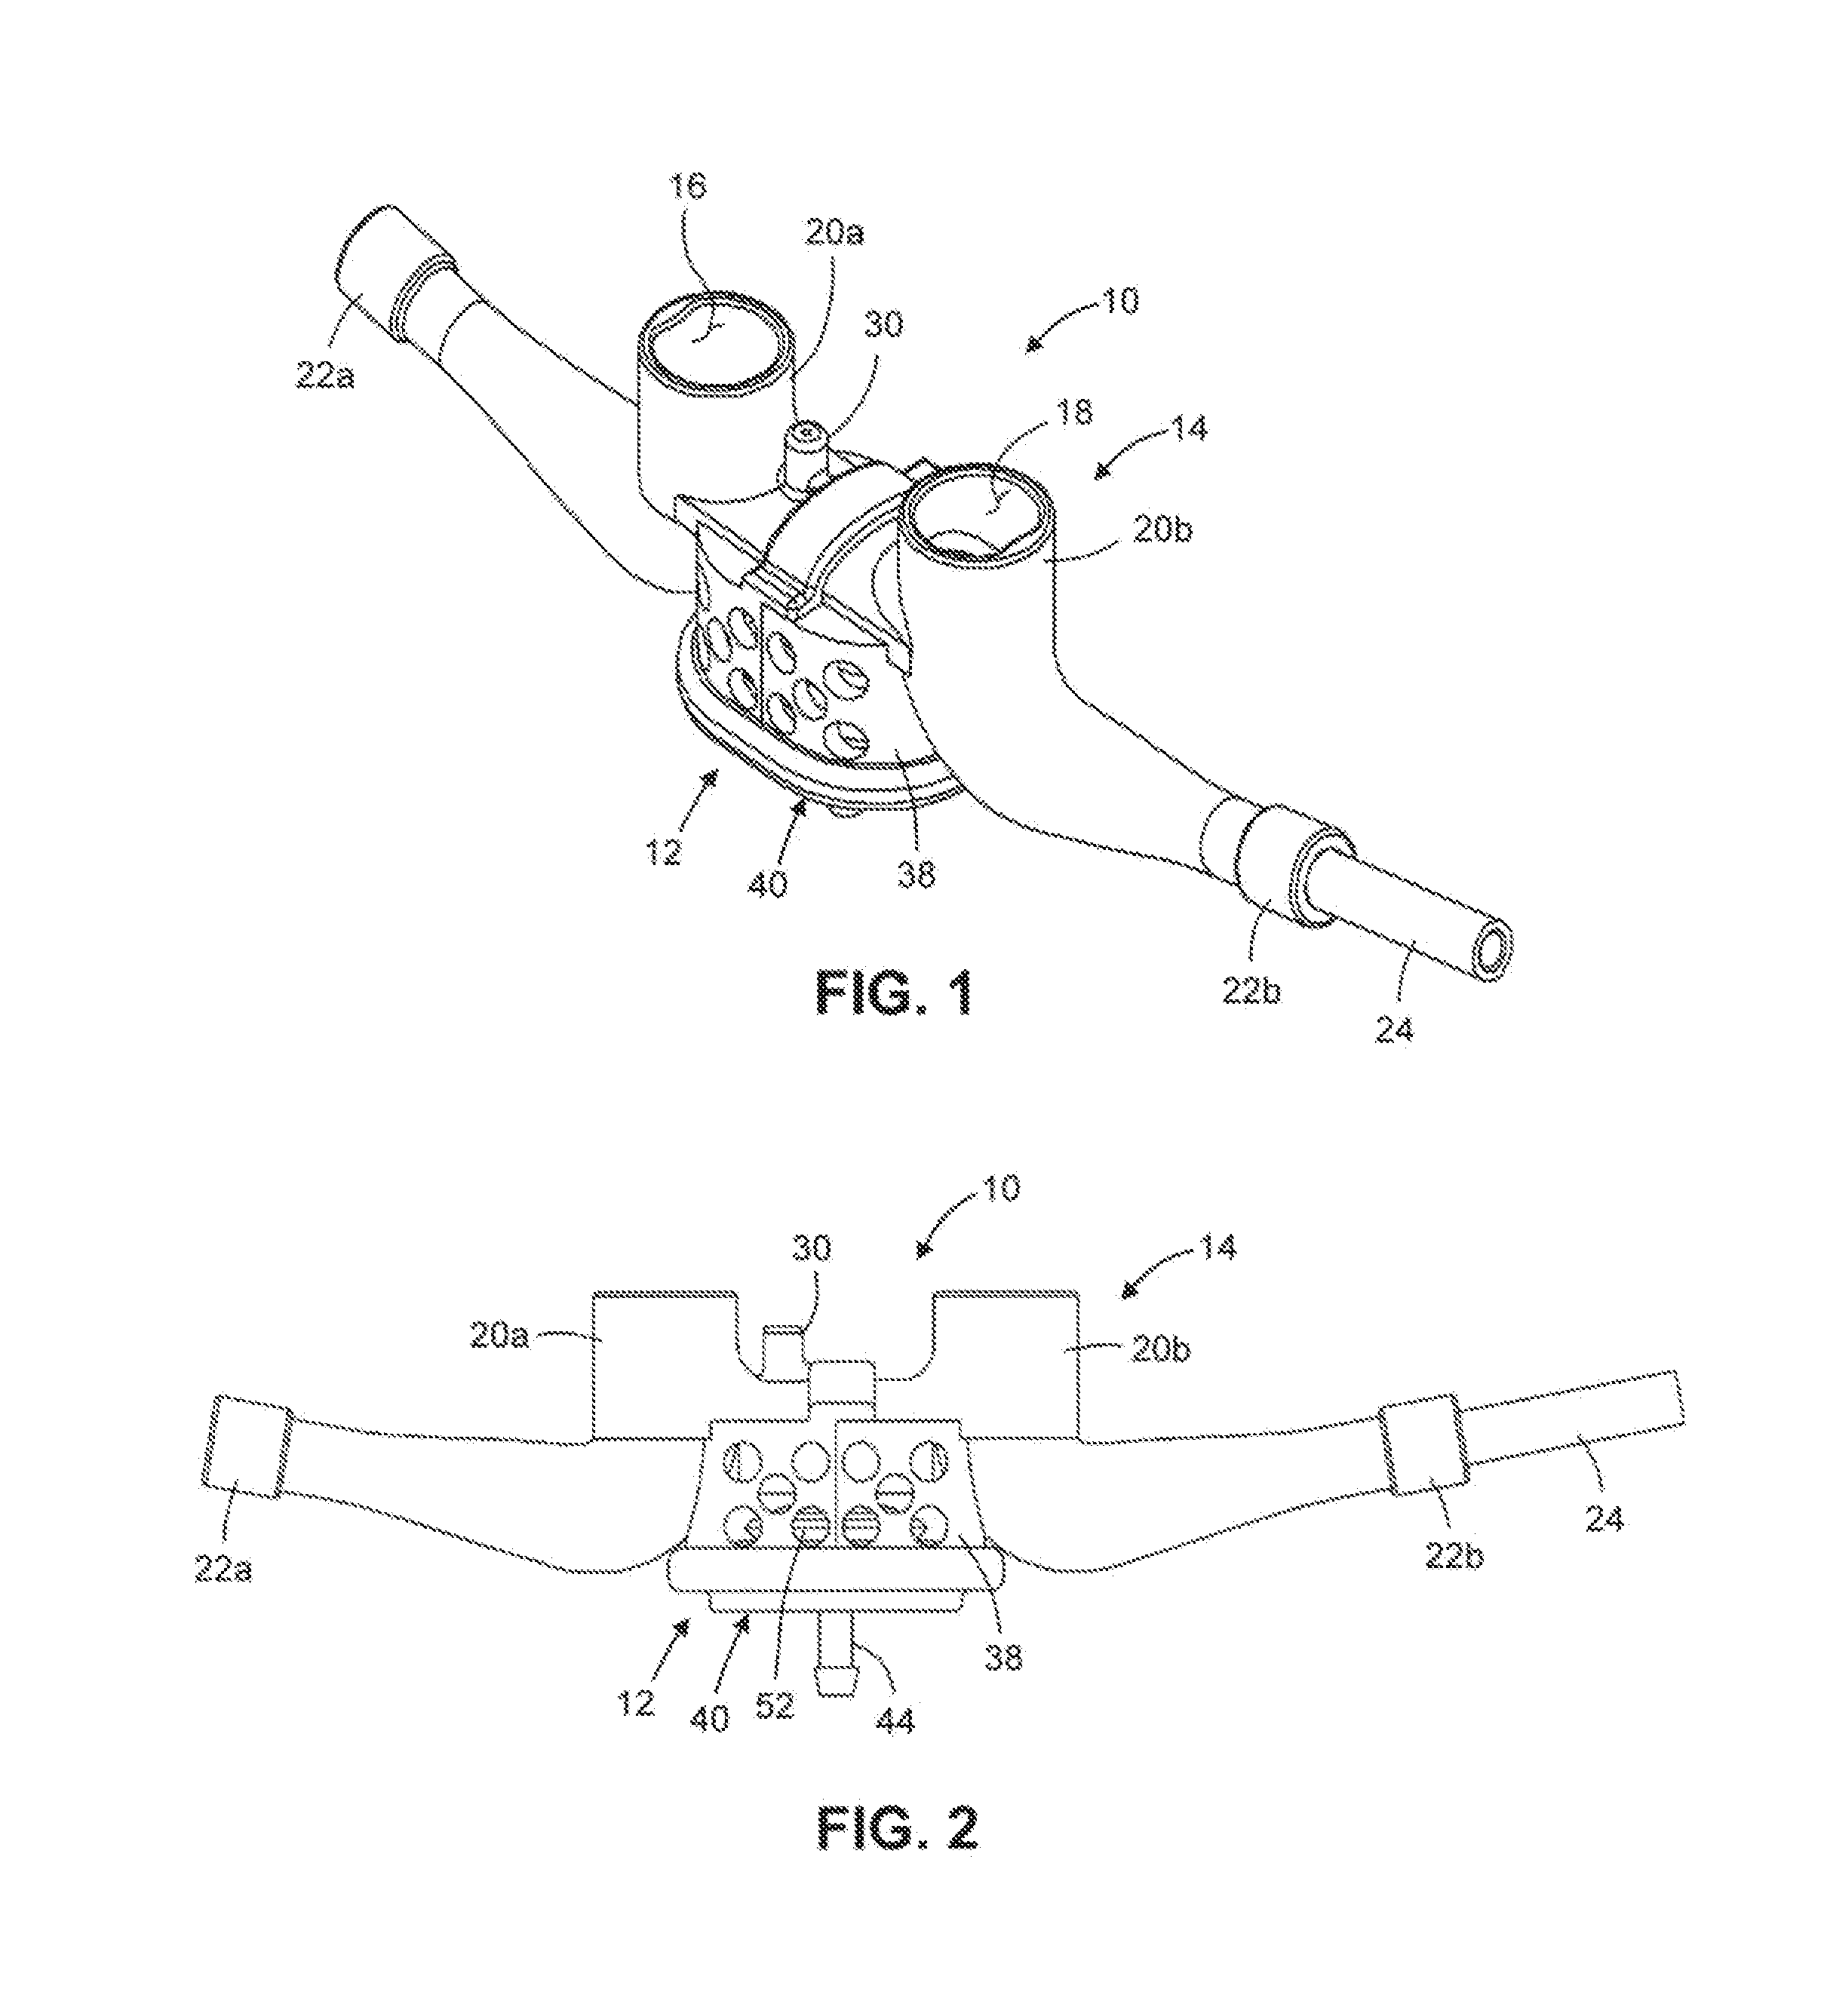 Ventilation mask with integrated piloted exhalation valve and method of ventilating a patient using the same